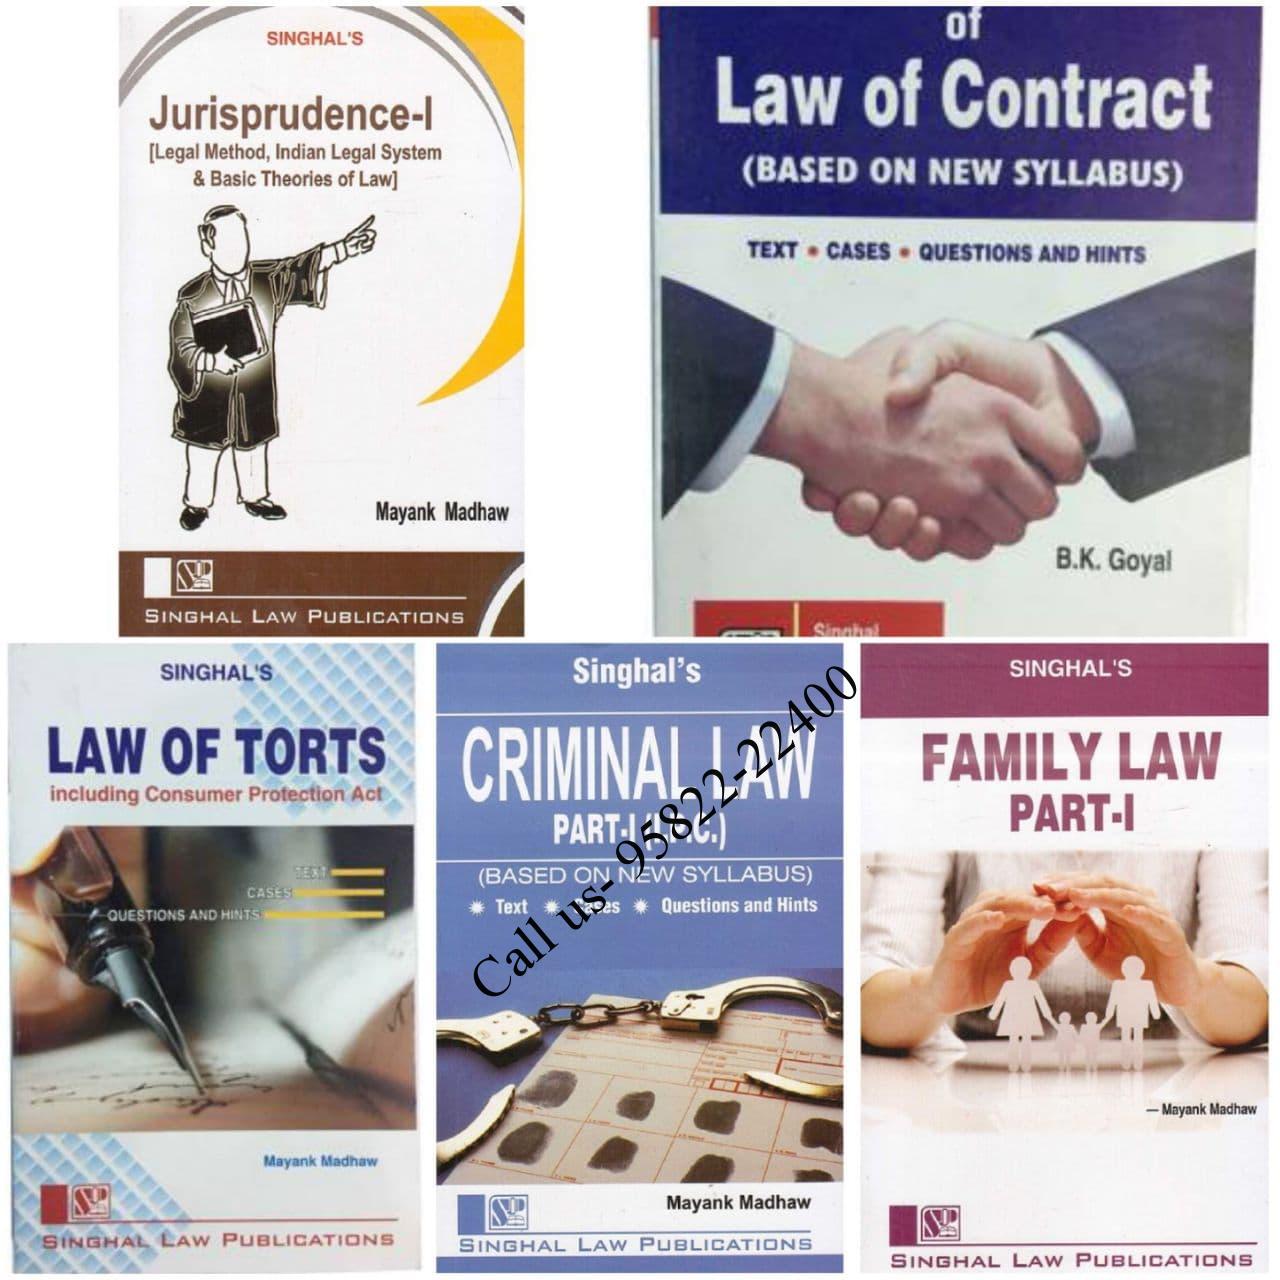 Singhal's Set of 5 Dukkis for 1st Semester Delhi University (DU) with Law of Torts by Mayank Madhaw cover page